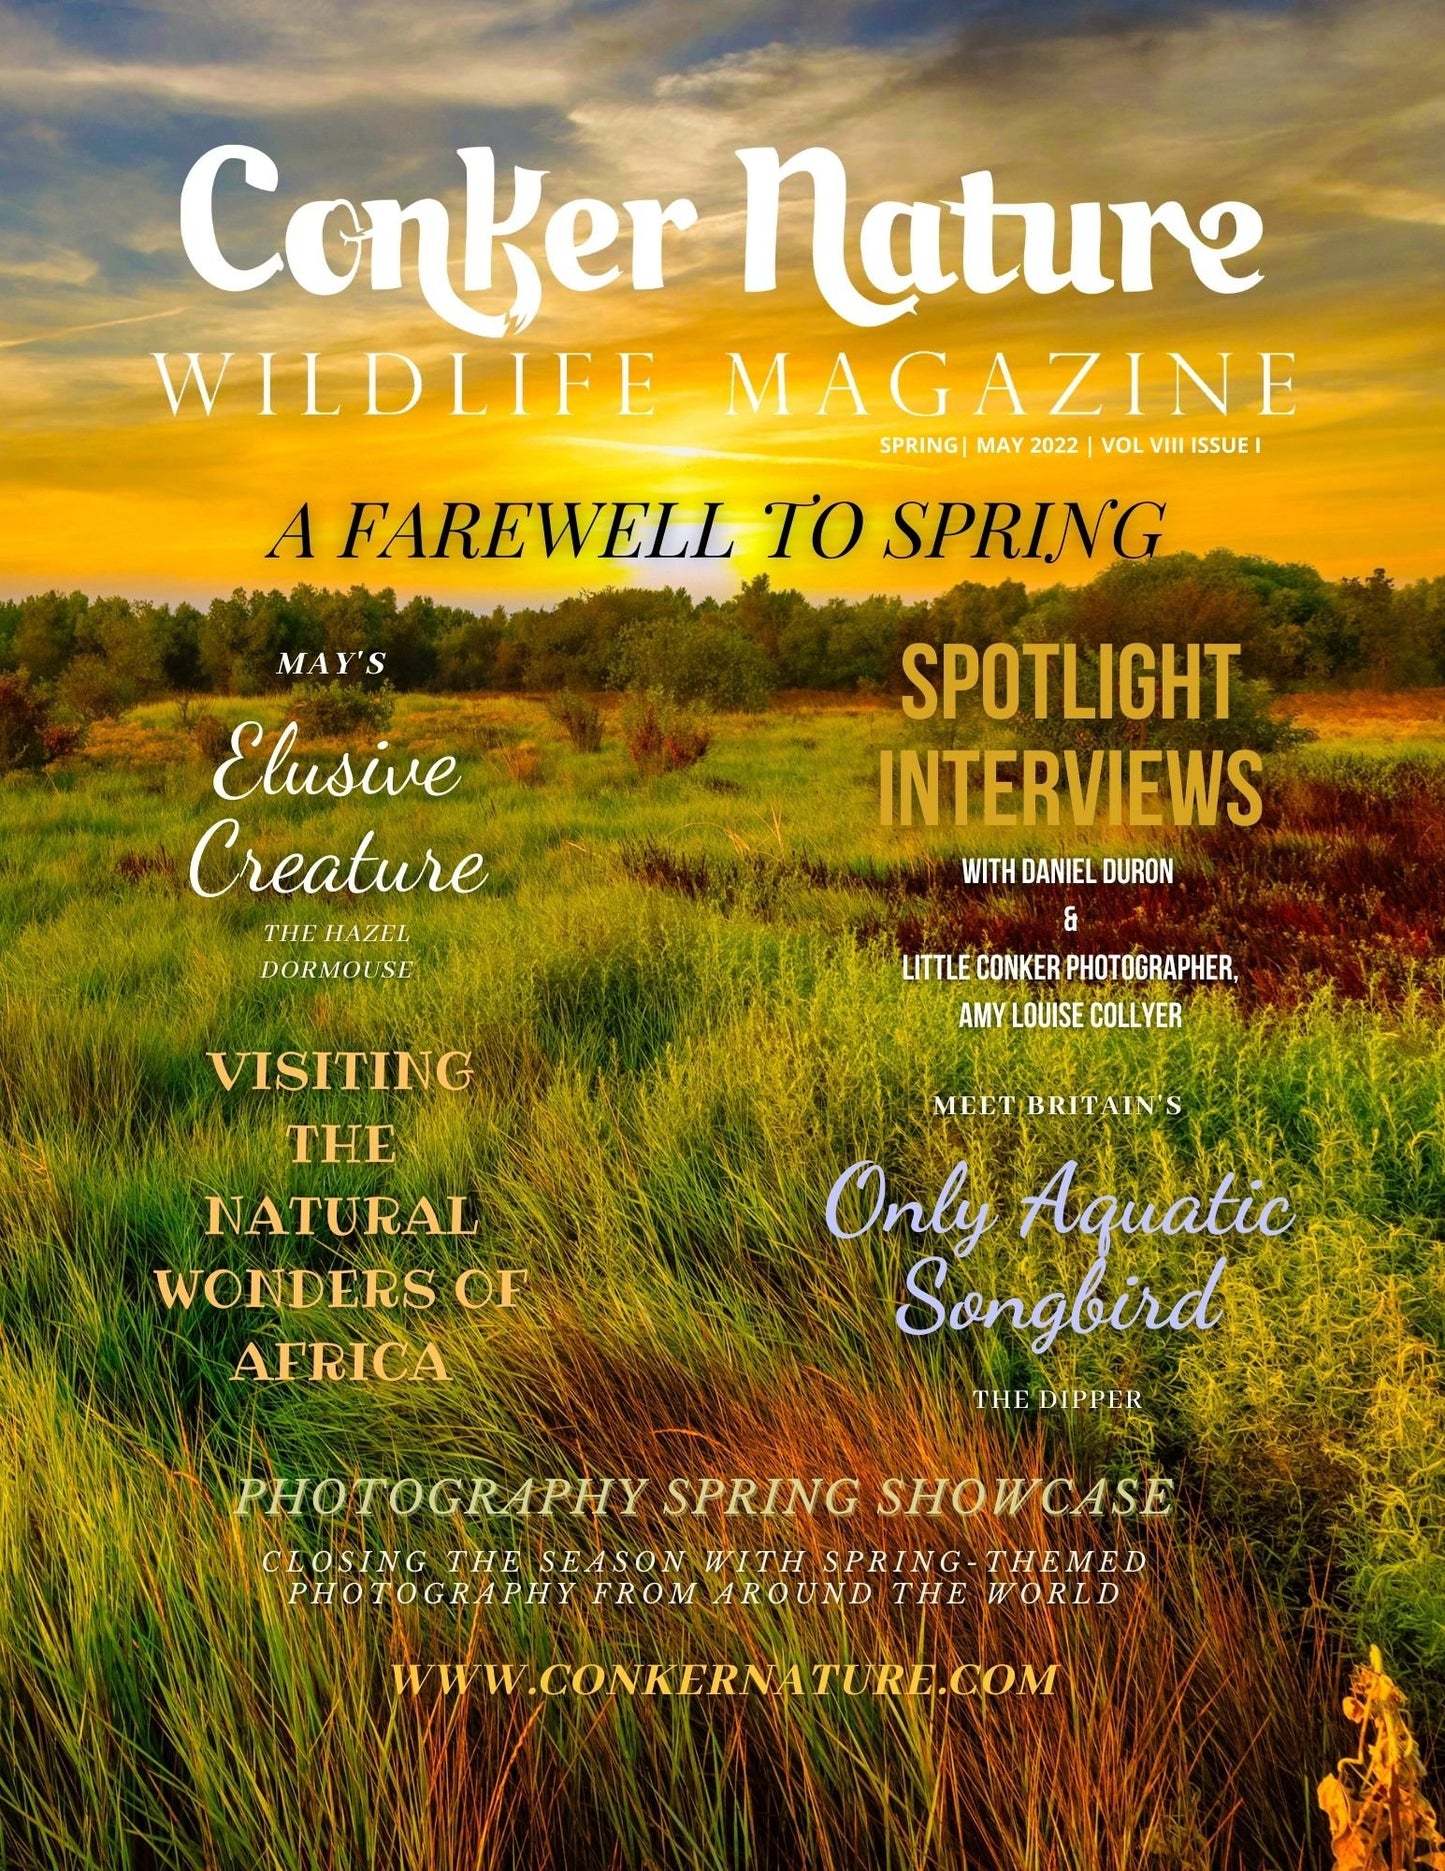 CONKER NATURE MAGAZINE: SPRING| MAY 2022 | VOL VIII ISSUE I